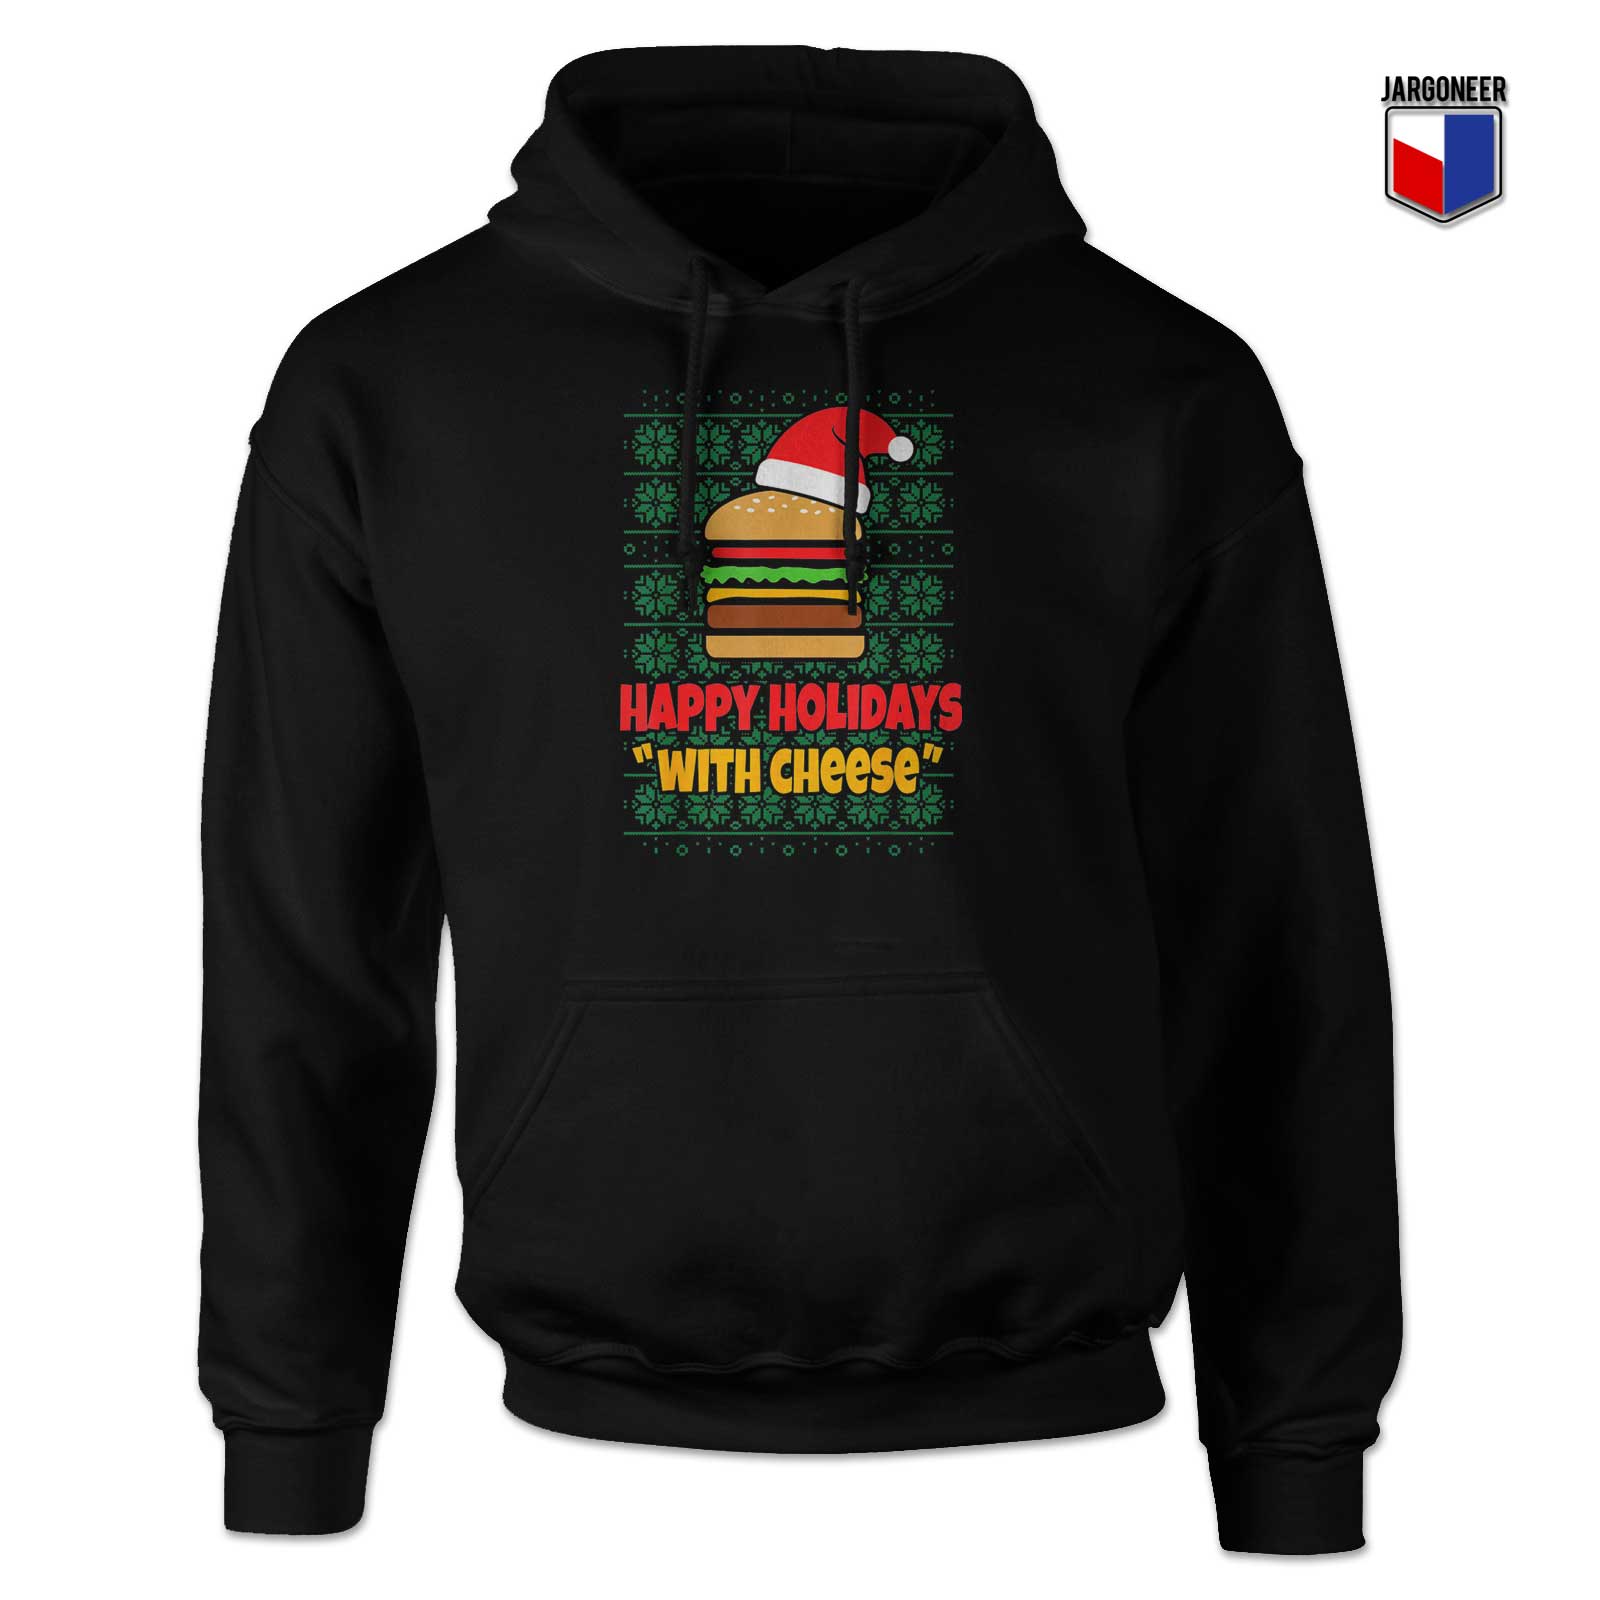 Happy Holidays With Cheese Christmas Hoodie - Shop Unique Graphic Cool Shirt Designs